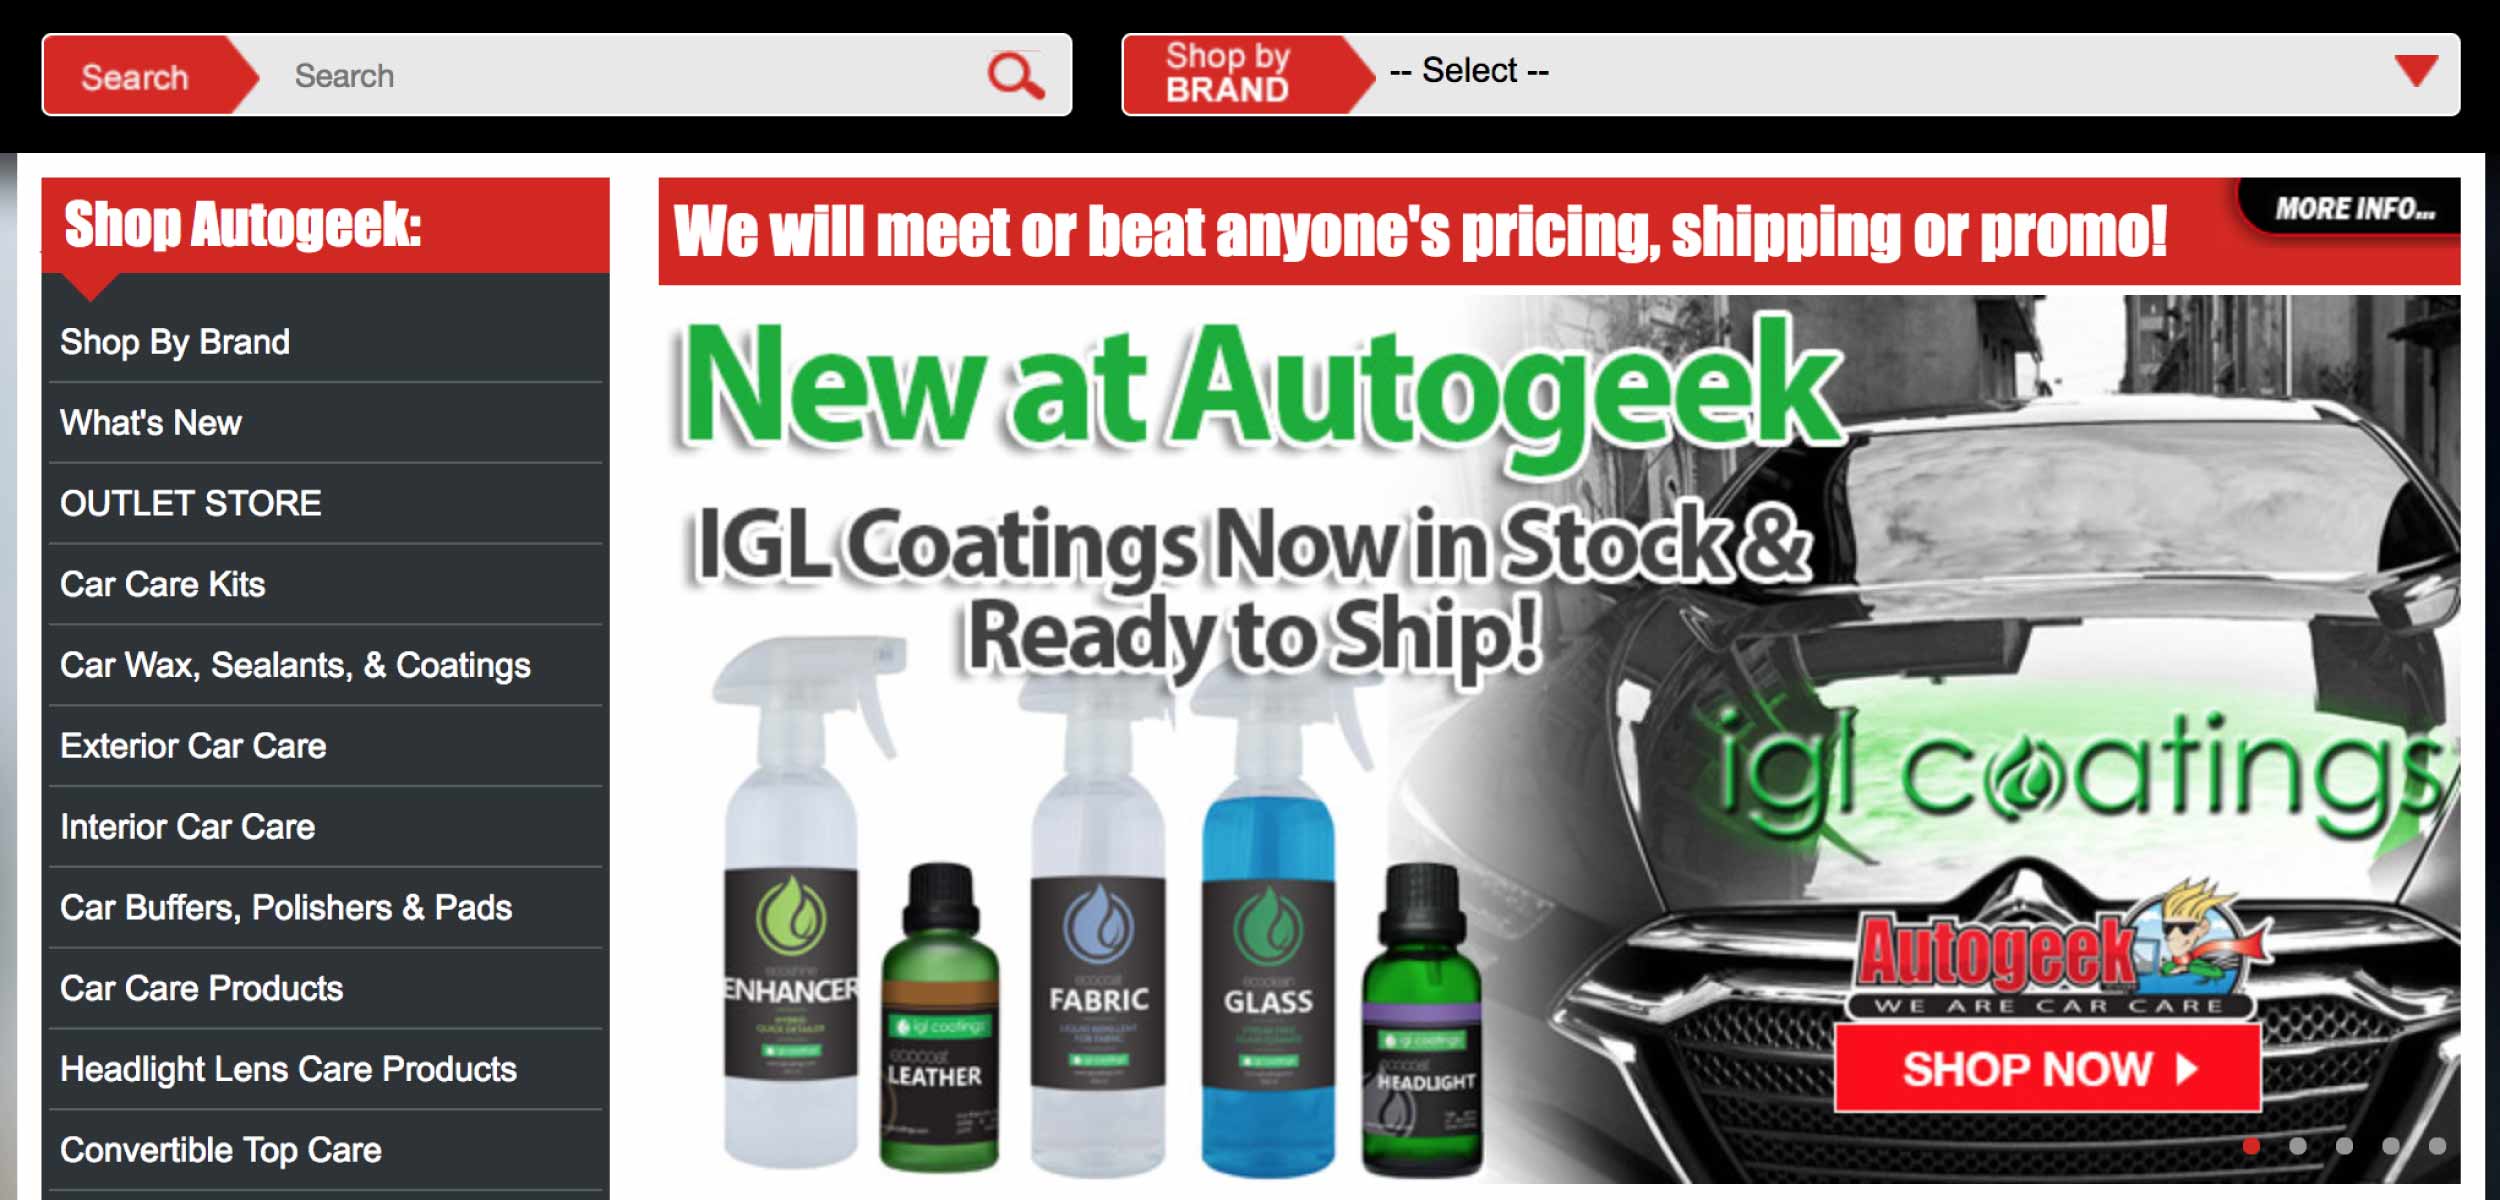 new-at-autogeek-igl-coatings-now-in-stock-ready-to-ship